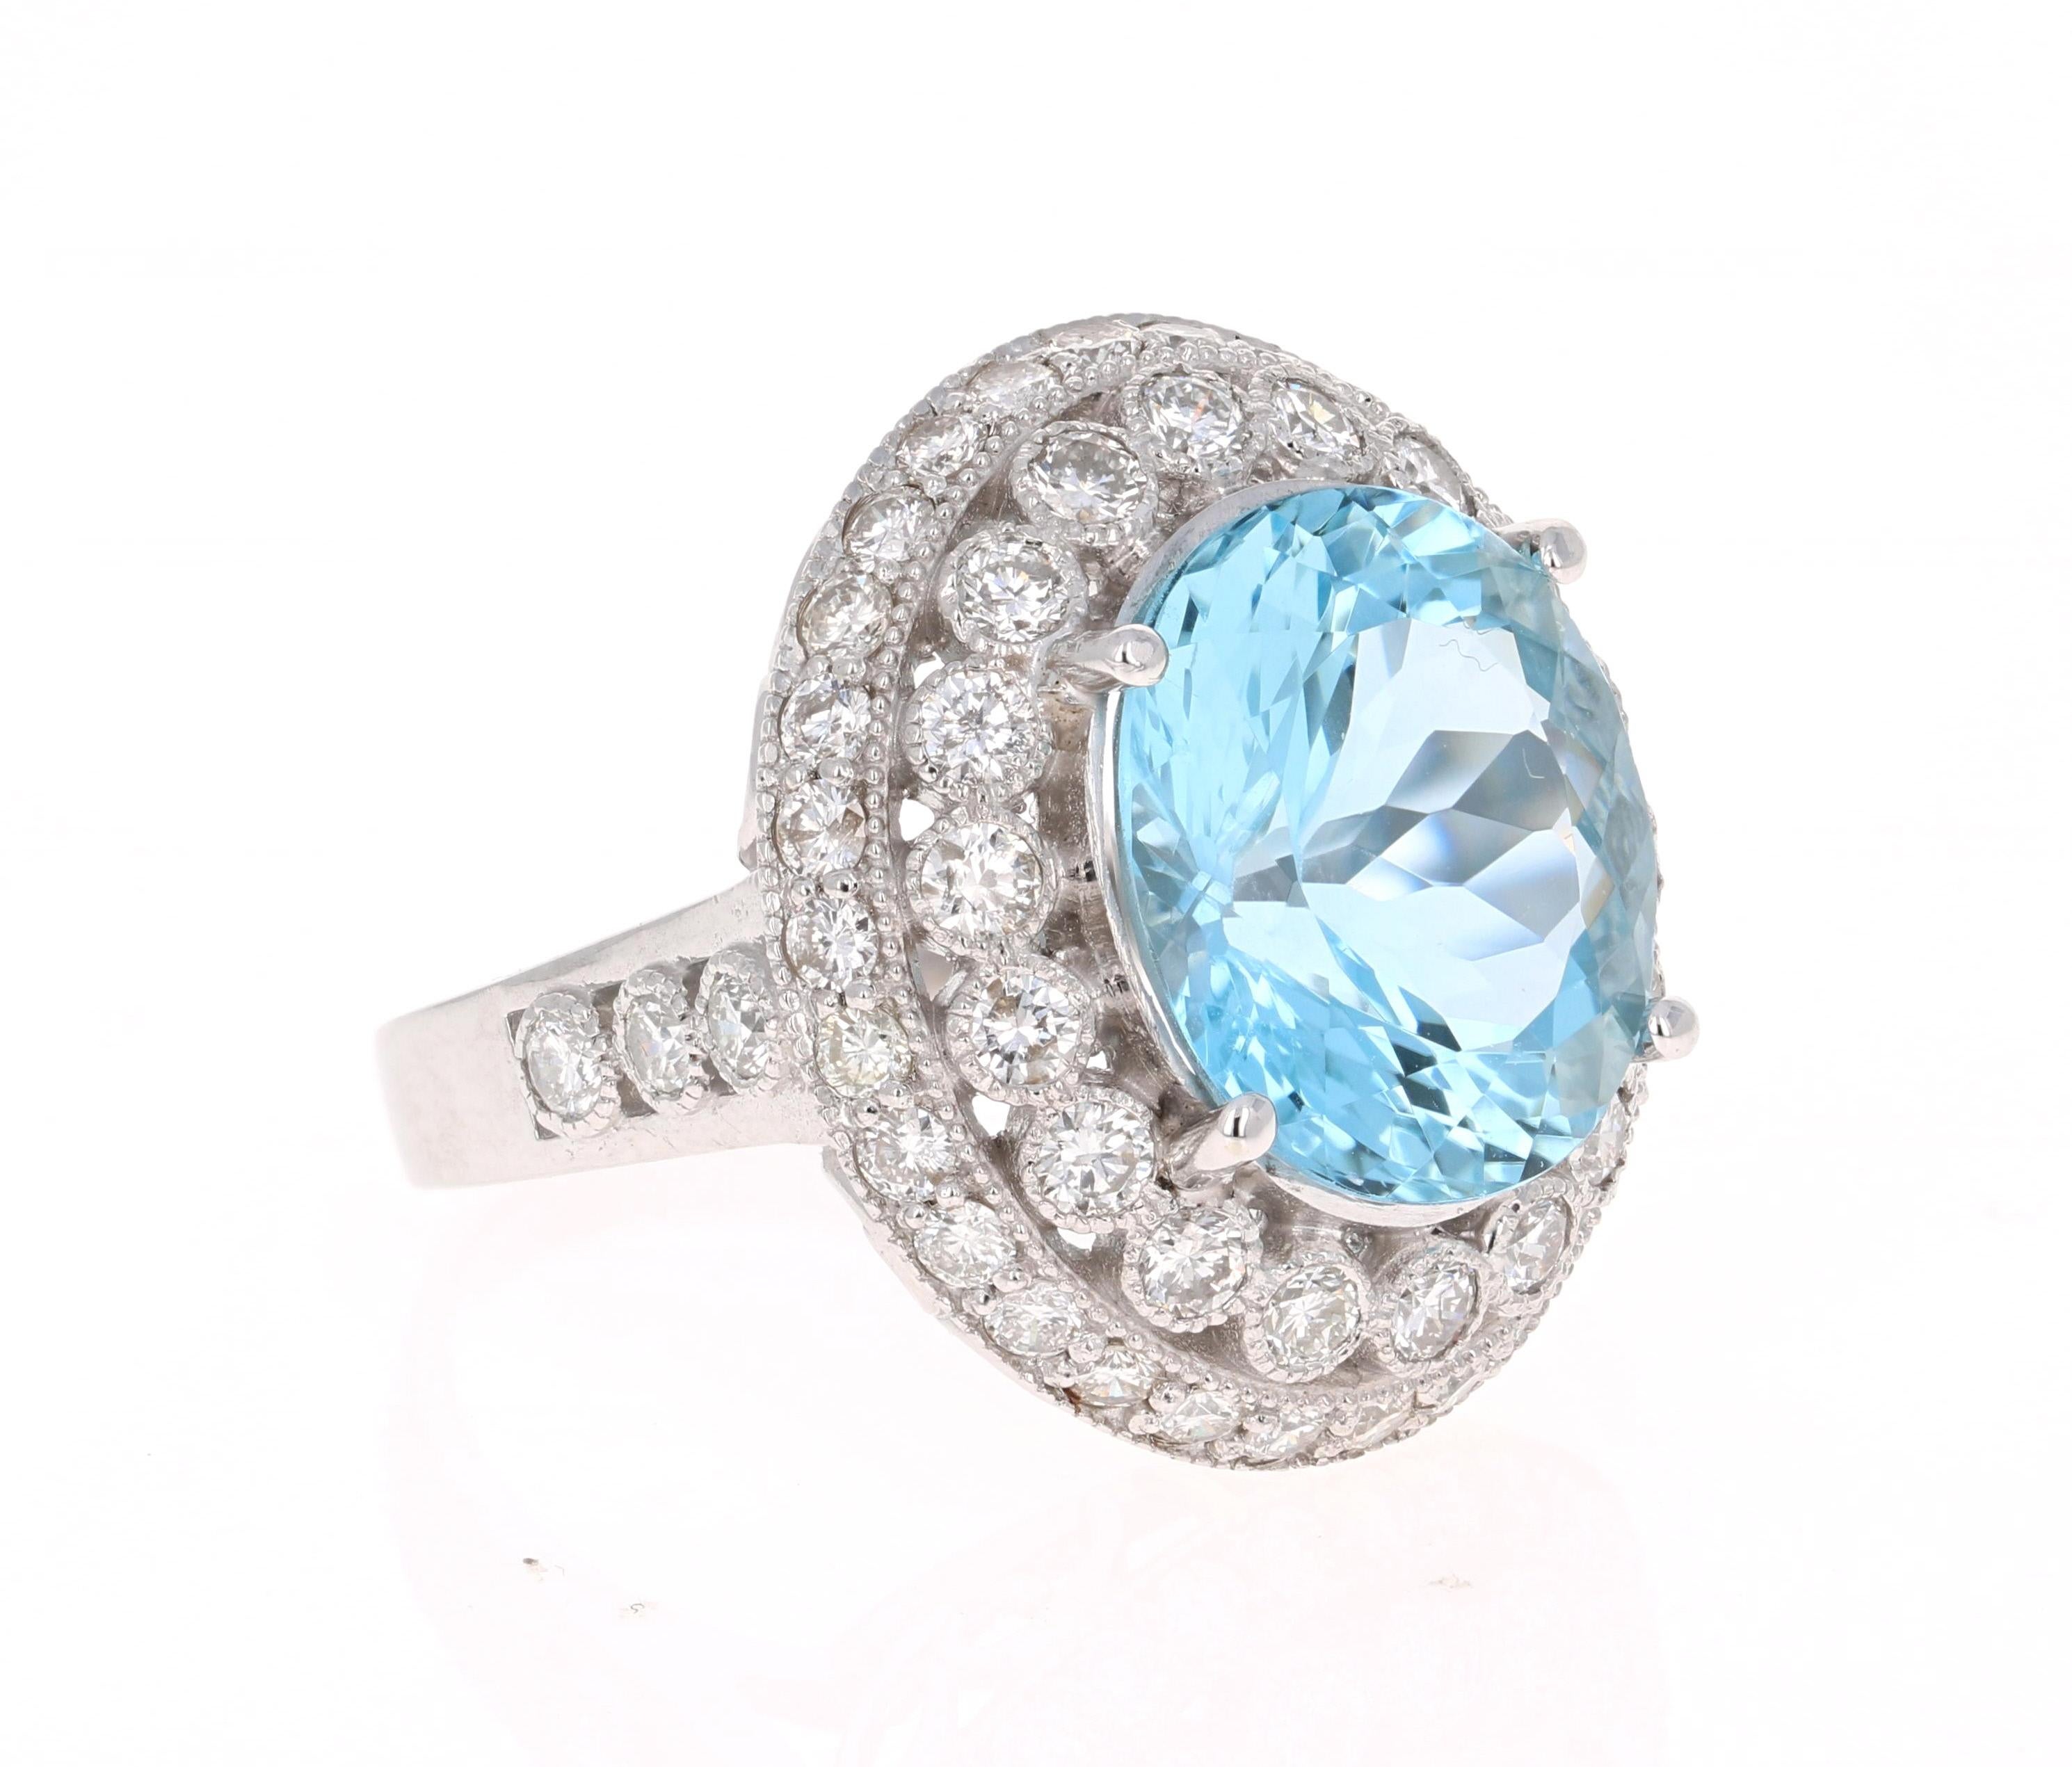 This ring has a beautiful 8.62 Carat Oval Cut Aquamarine and is surrounded by 54 Round Cut Diamonds that weigh 2.35 carat (Clarity: SI1, Color: F). The total carat weight of this ring is 10.97 carats. 
The Aquamarine is 15 mm x 8 mm and has a